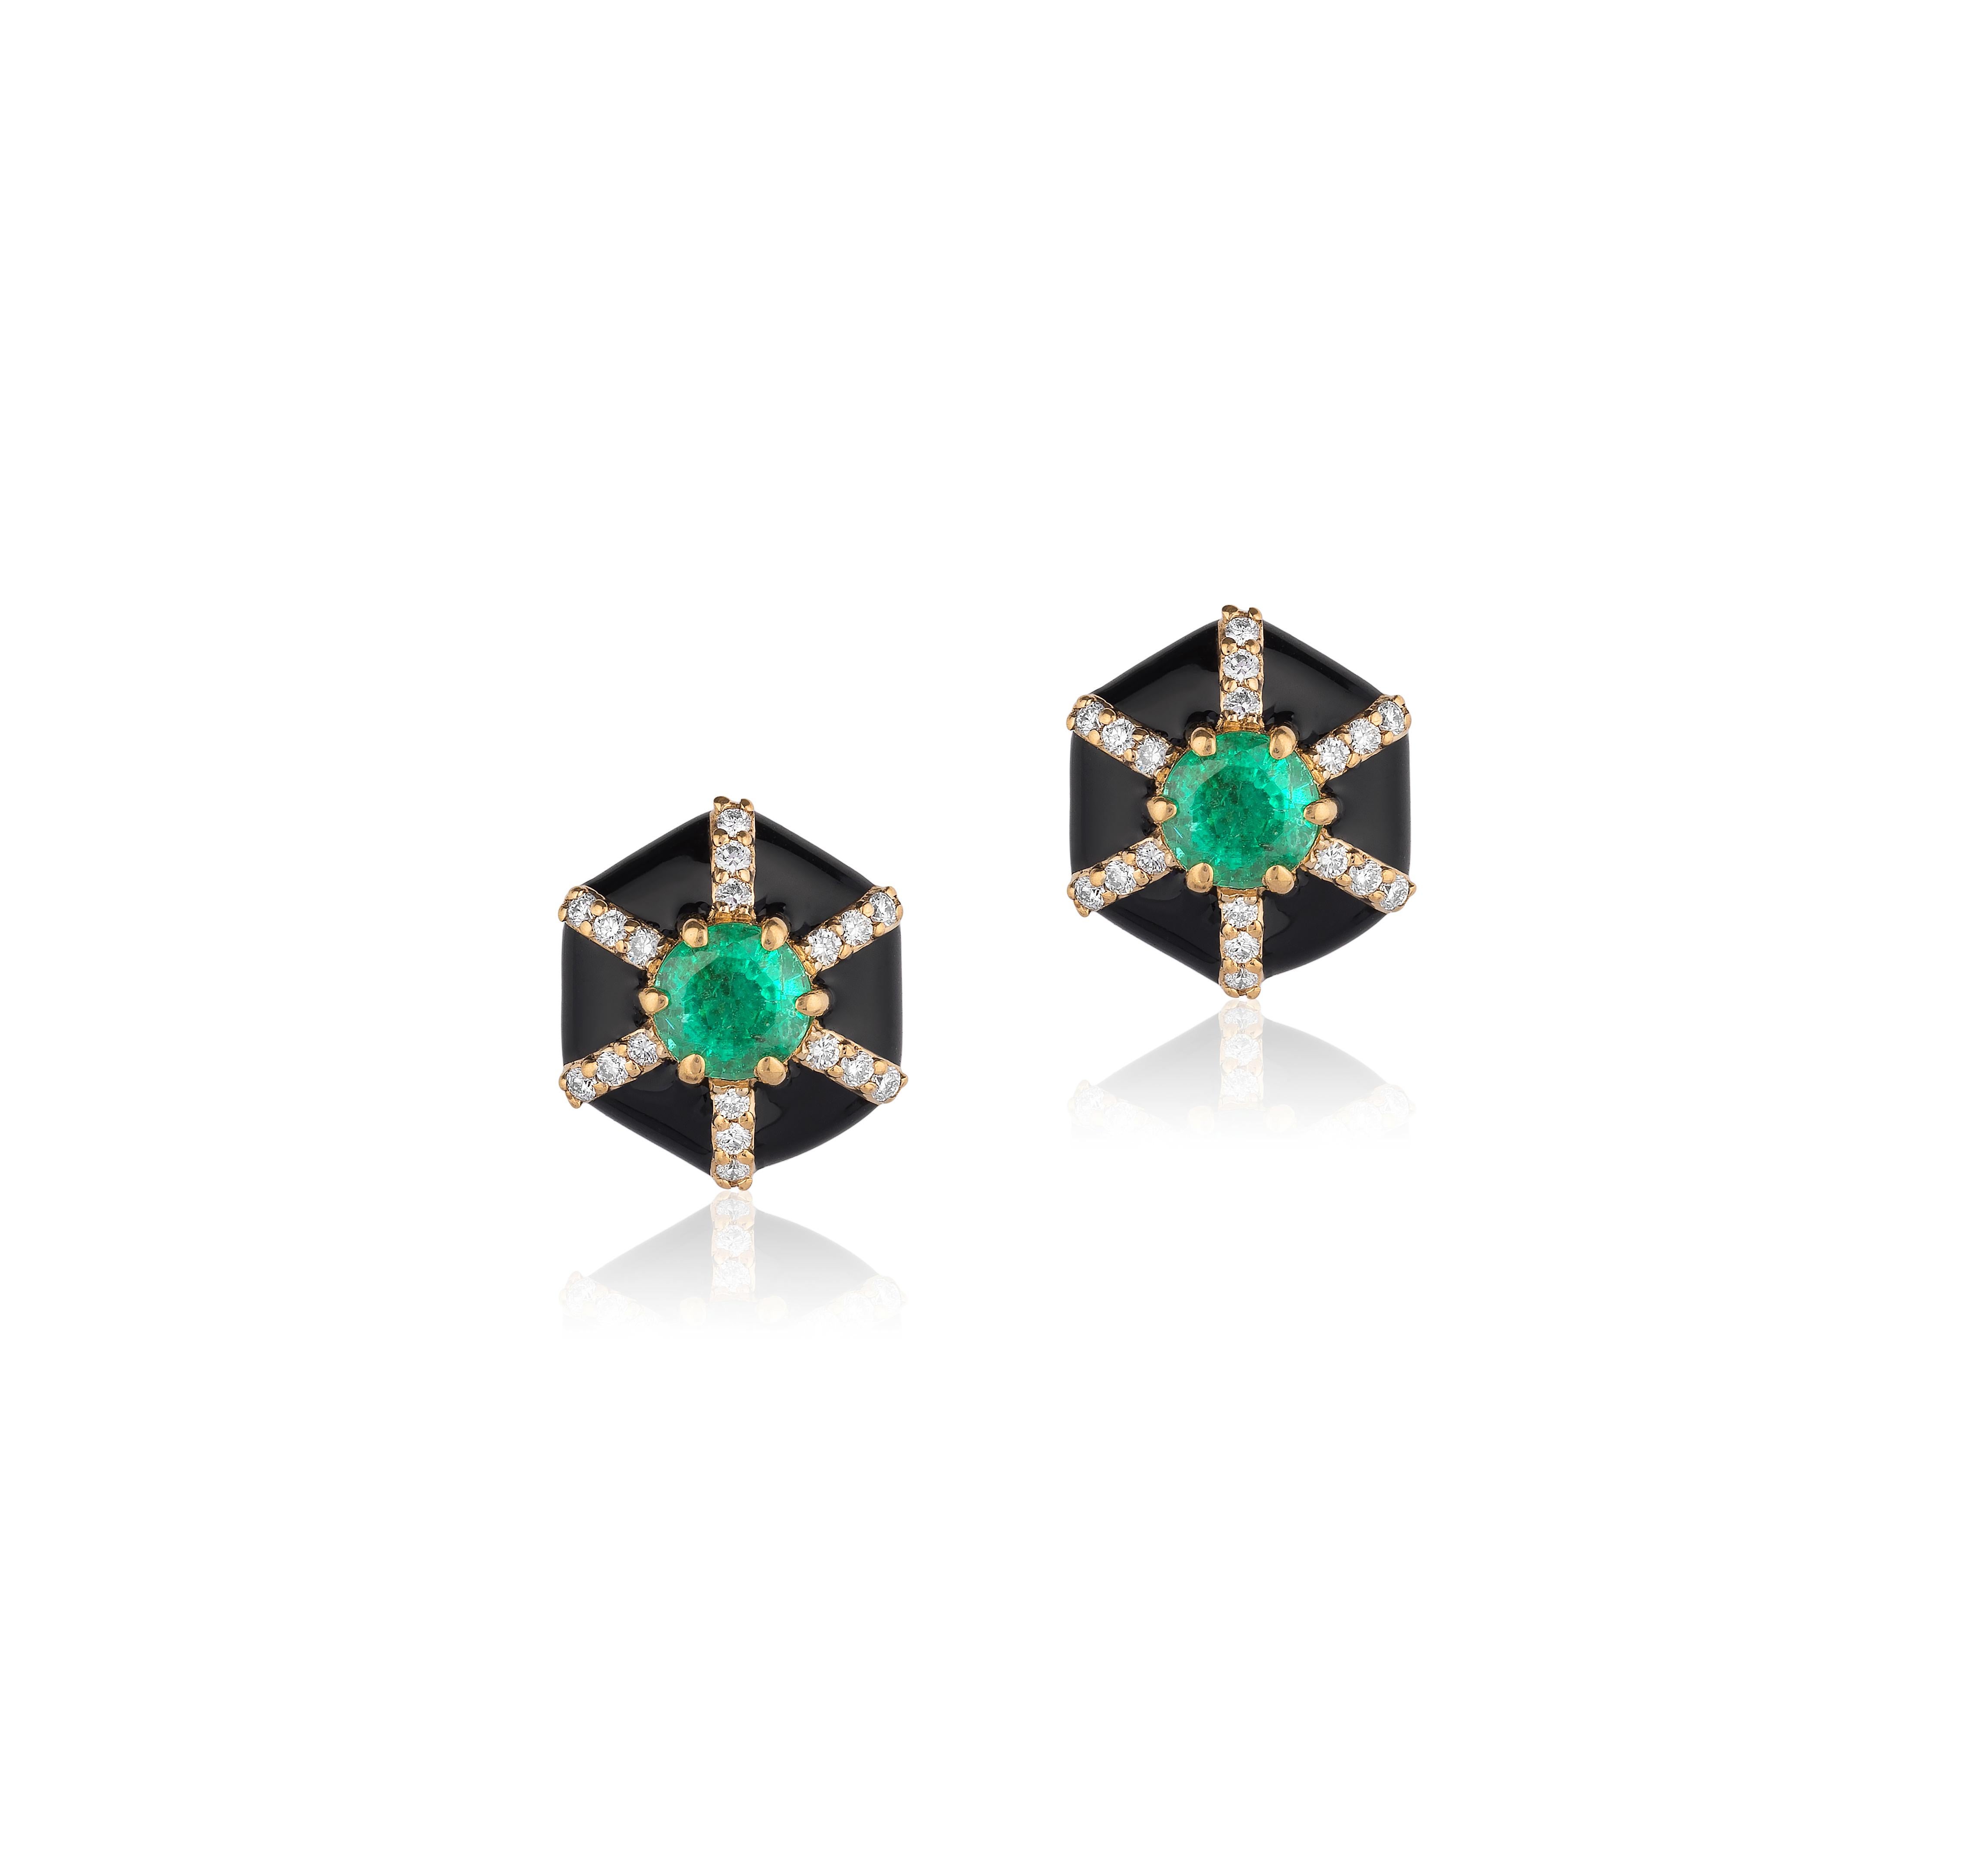 Hexagon Black Enamel Stud Earrings with Emerald and Diamonds in 18K Yellow Gold. from 'Queen' Collection
Stone Size: 4 mm
Approx. Stone Wt: Emerald- 0.52 Carats 
Diamonds: G-H / VS, Approx. Wt: 0.13 Carats